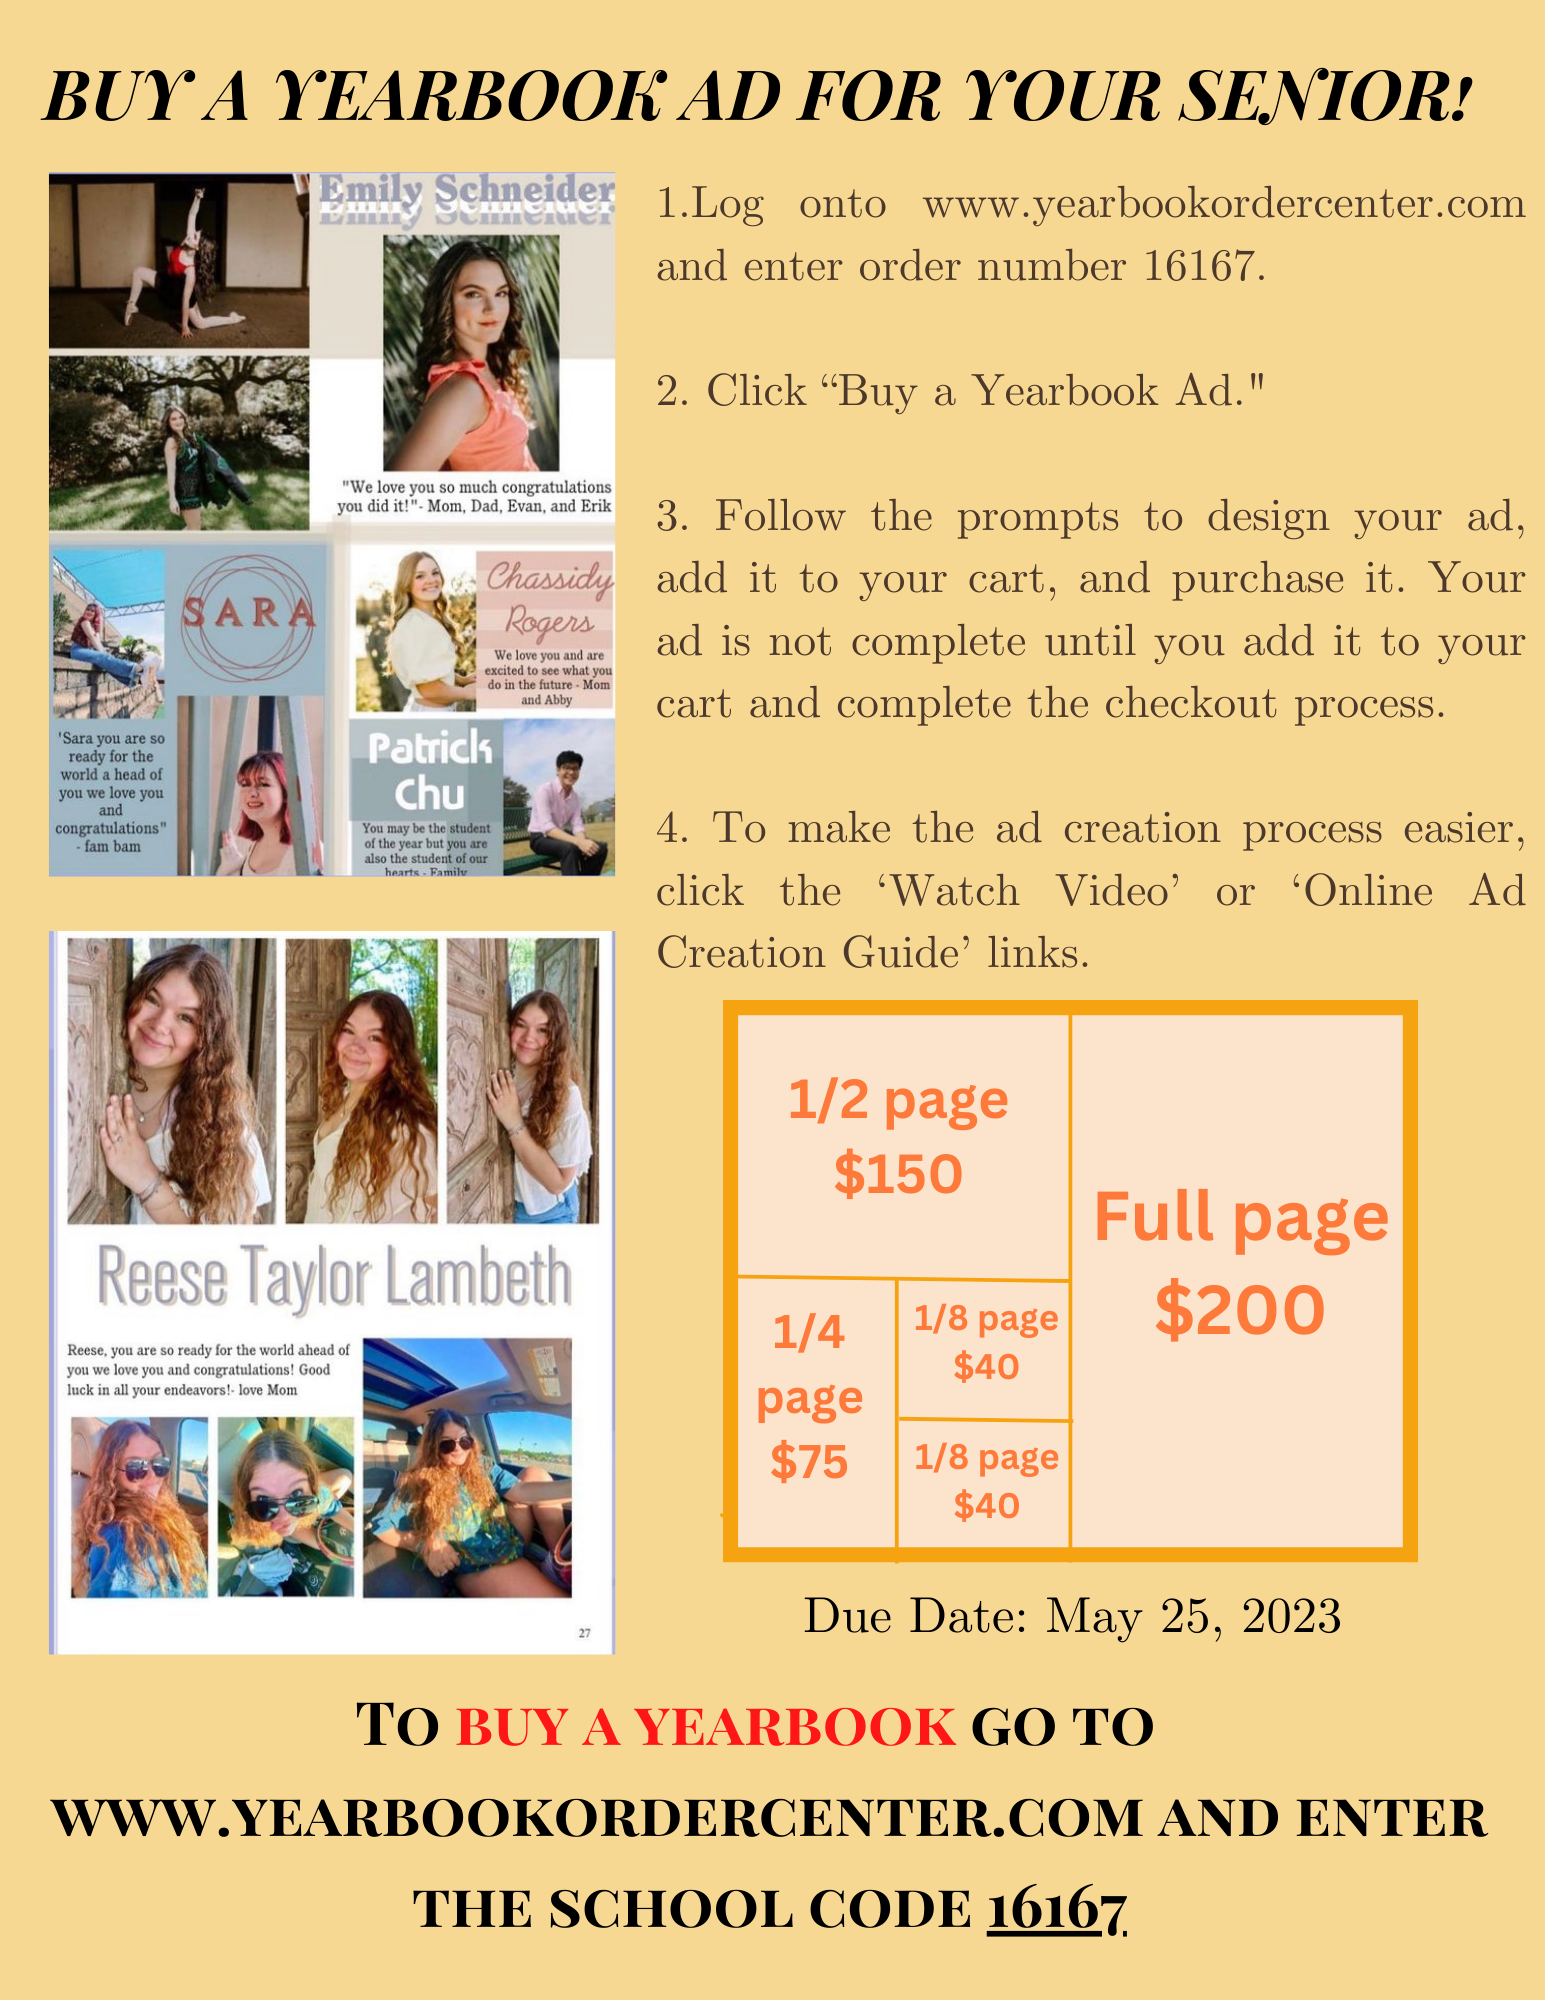 Buy a Yearbook Ad Information